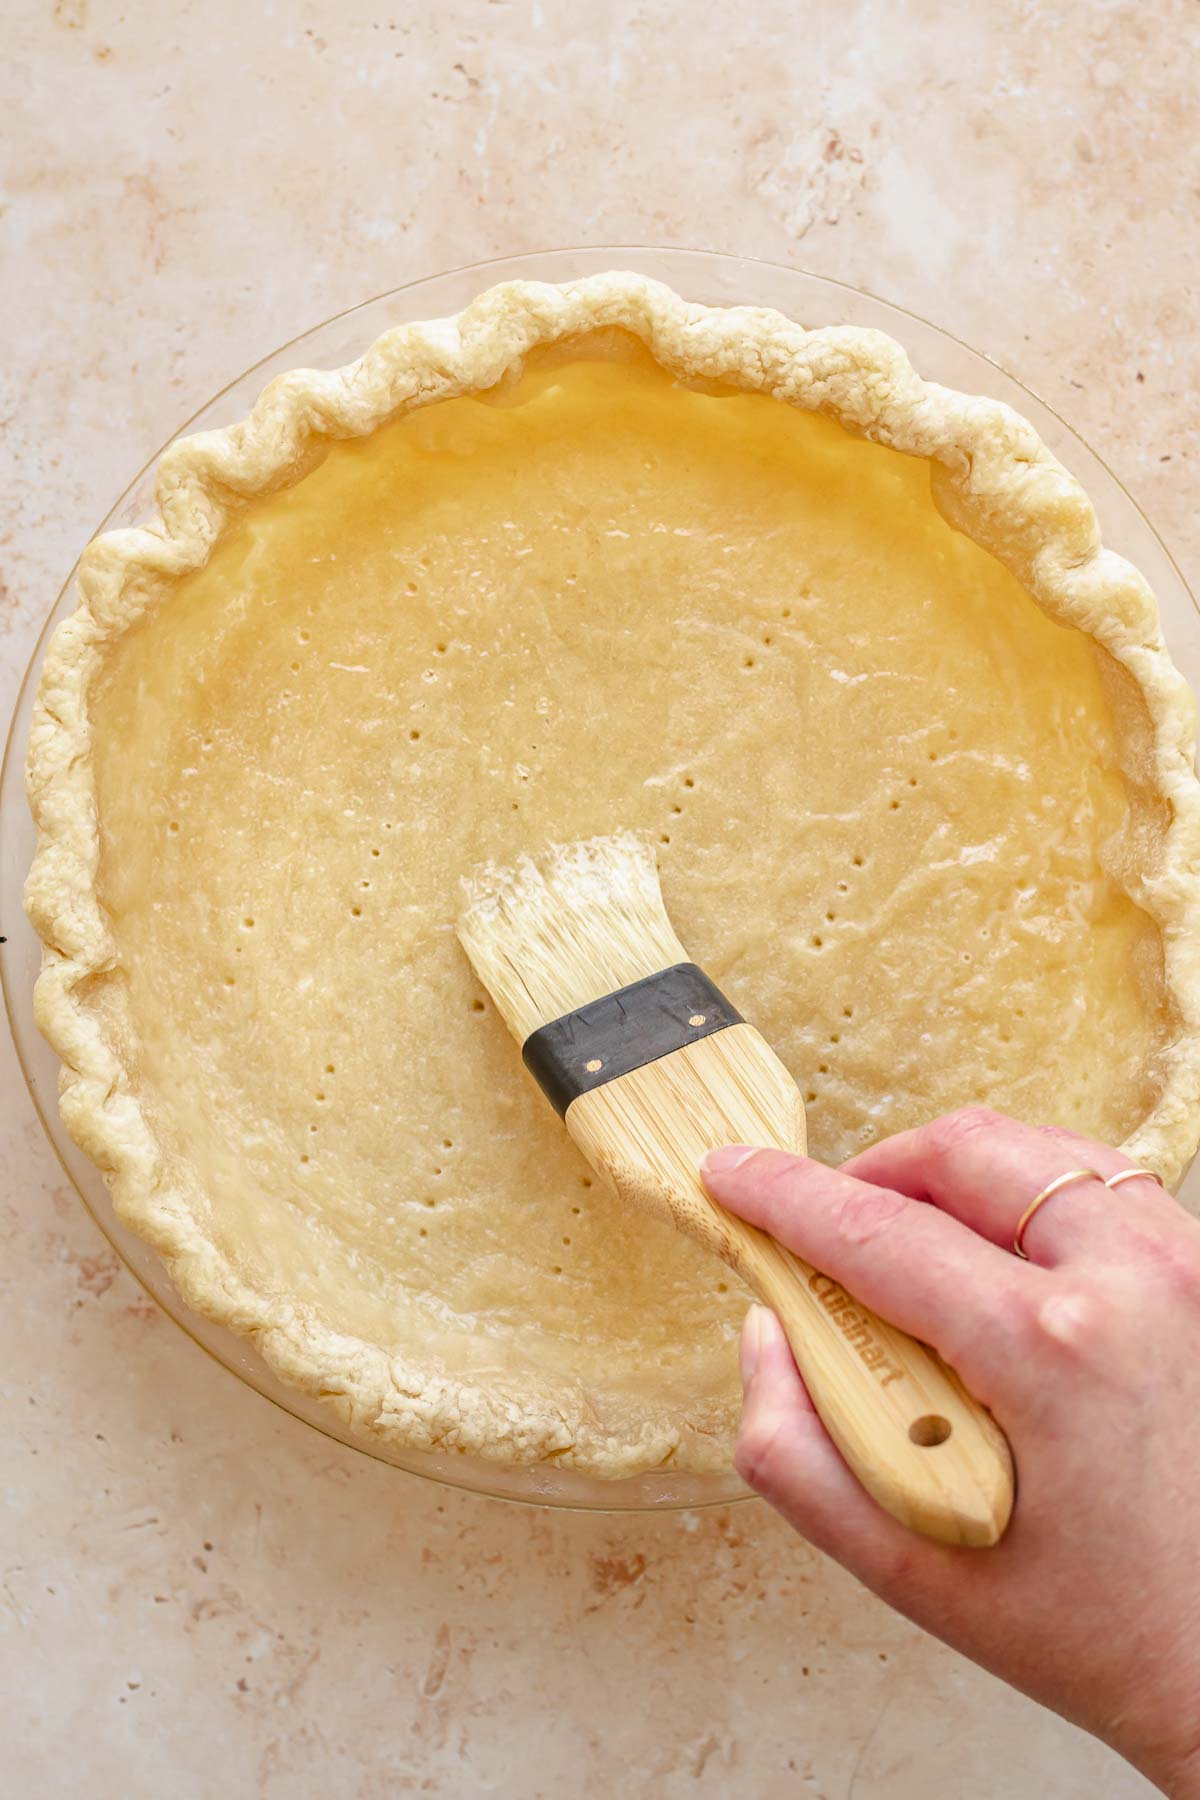 A pastry brush brushes egg whites into a par baked pie crust.